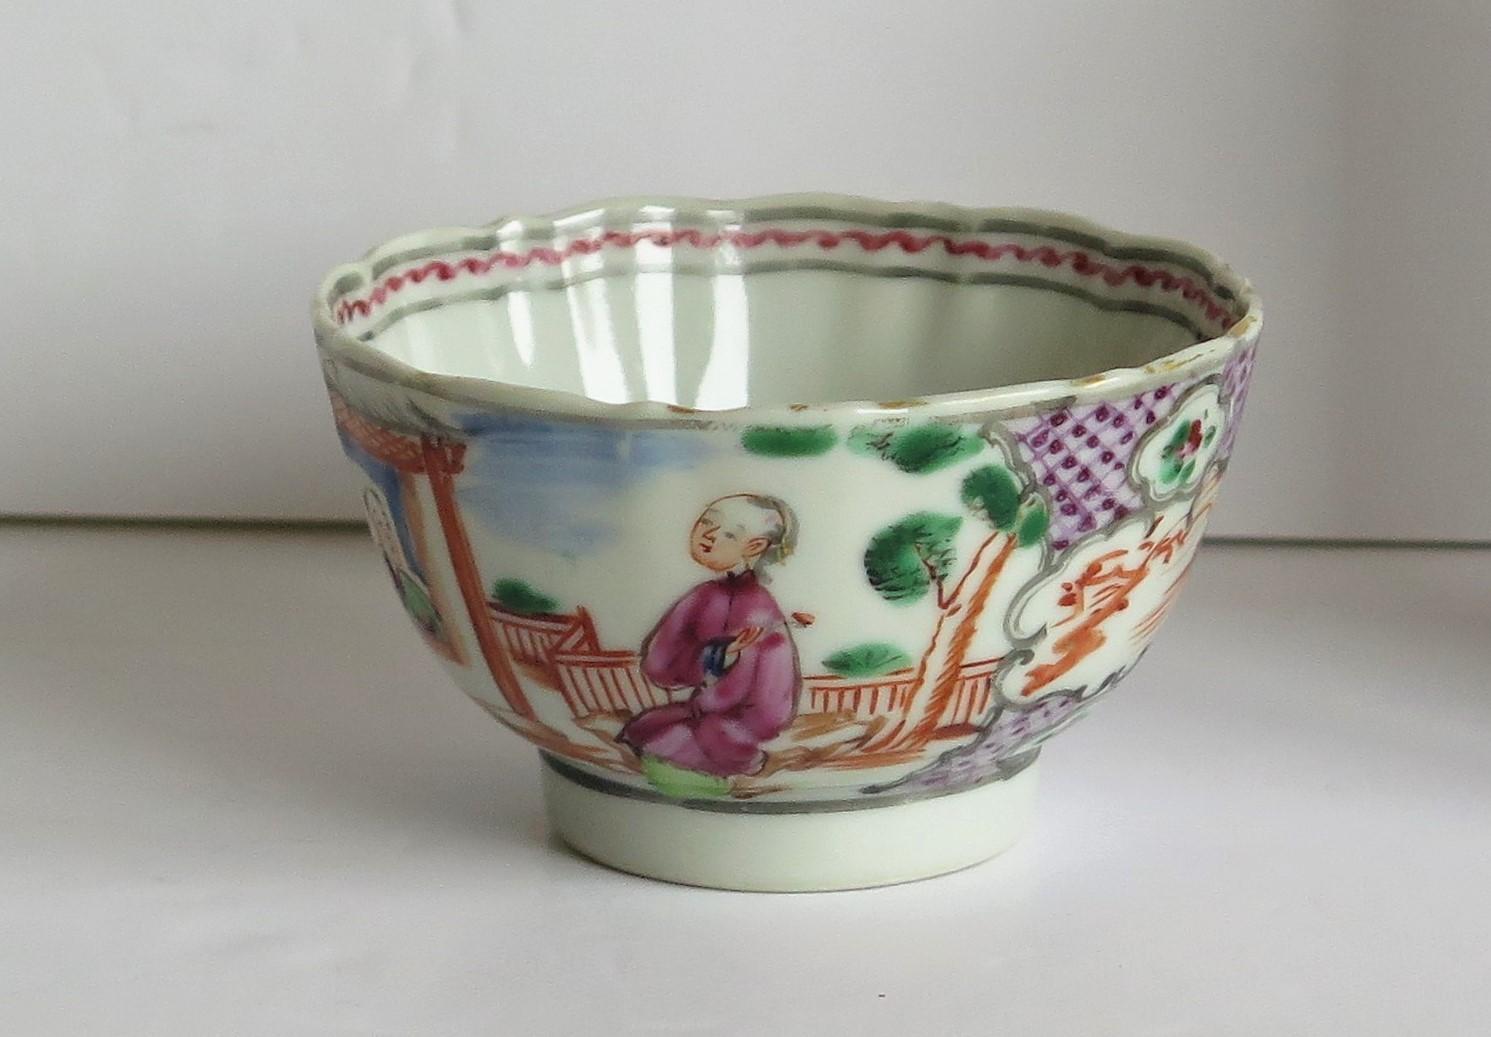 This is a finely hand painted Chinese porcelain tea bowl from the 18th century, Qing dynasty, Qianlong period, 1736-1795.

The bowl is beautifully decorated with two panels of figure scenes alternating with two magenta border panels. The figural